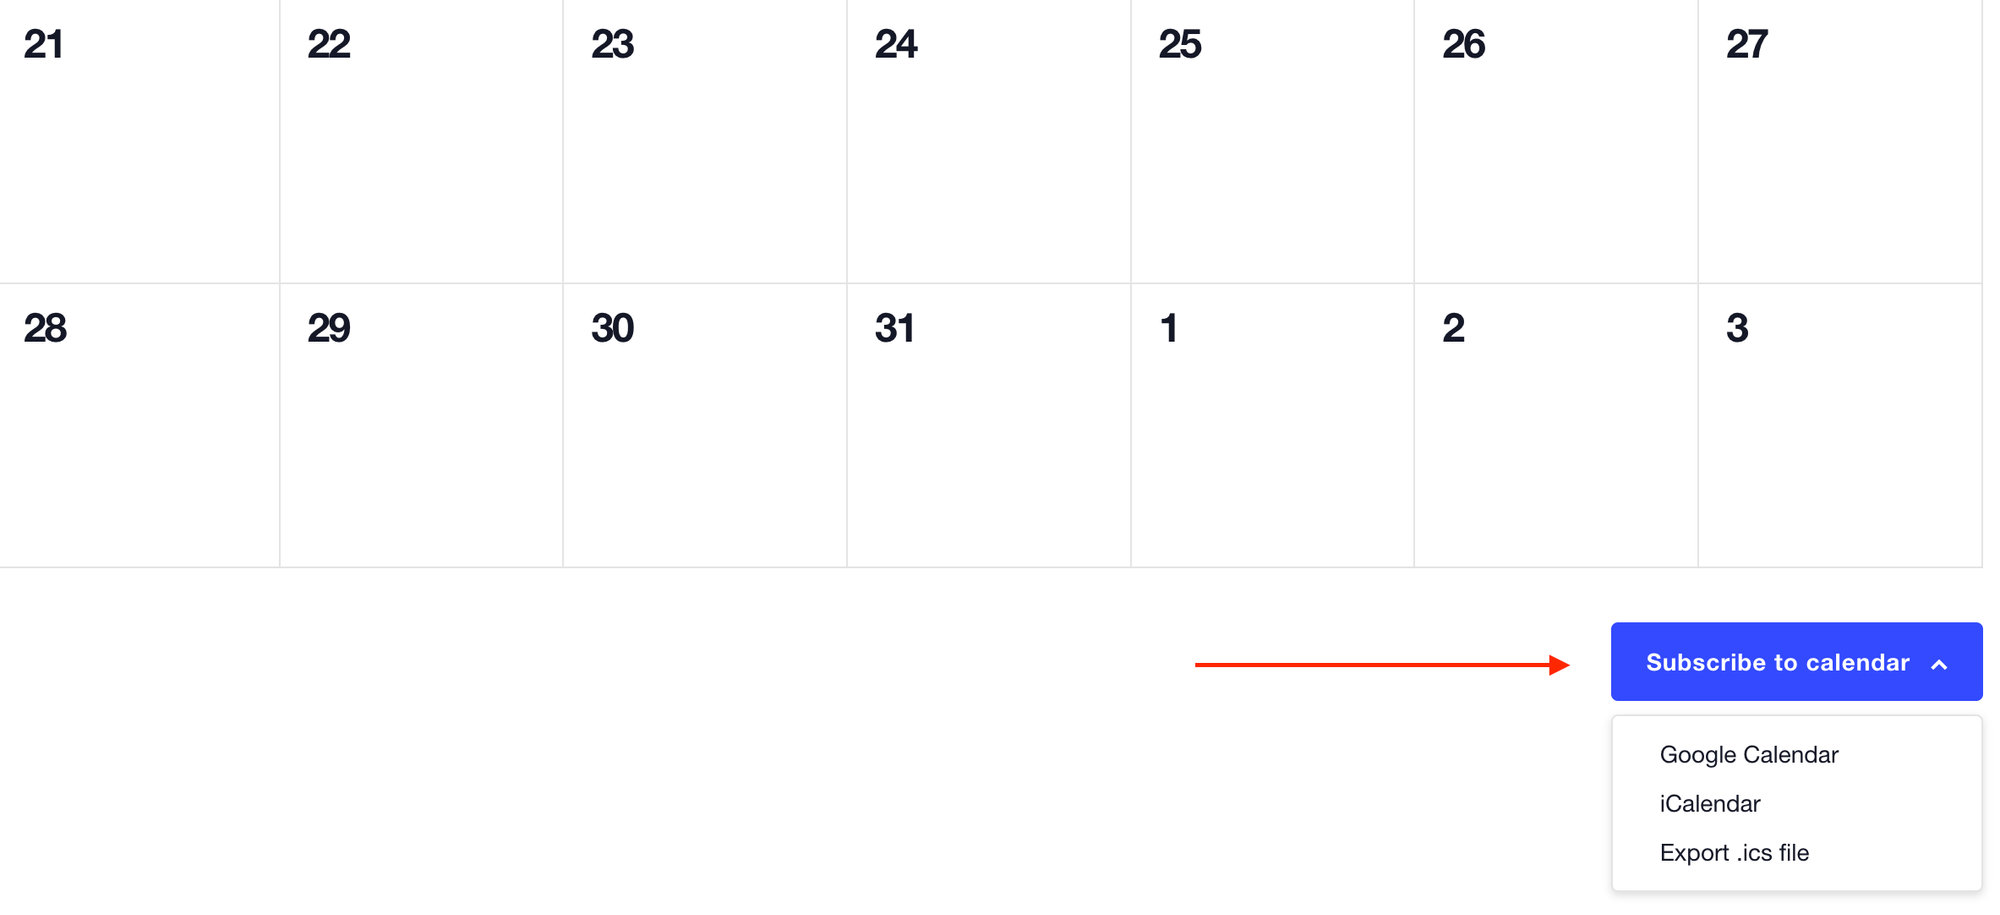 Subscribe to Calendar feature with The Events Calendar